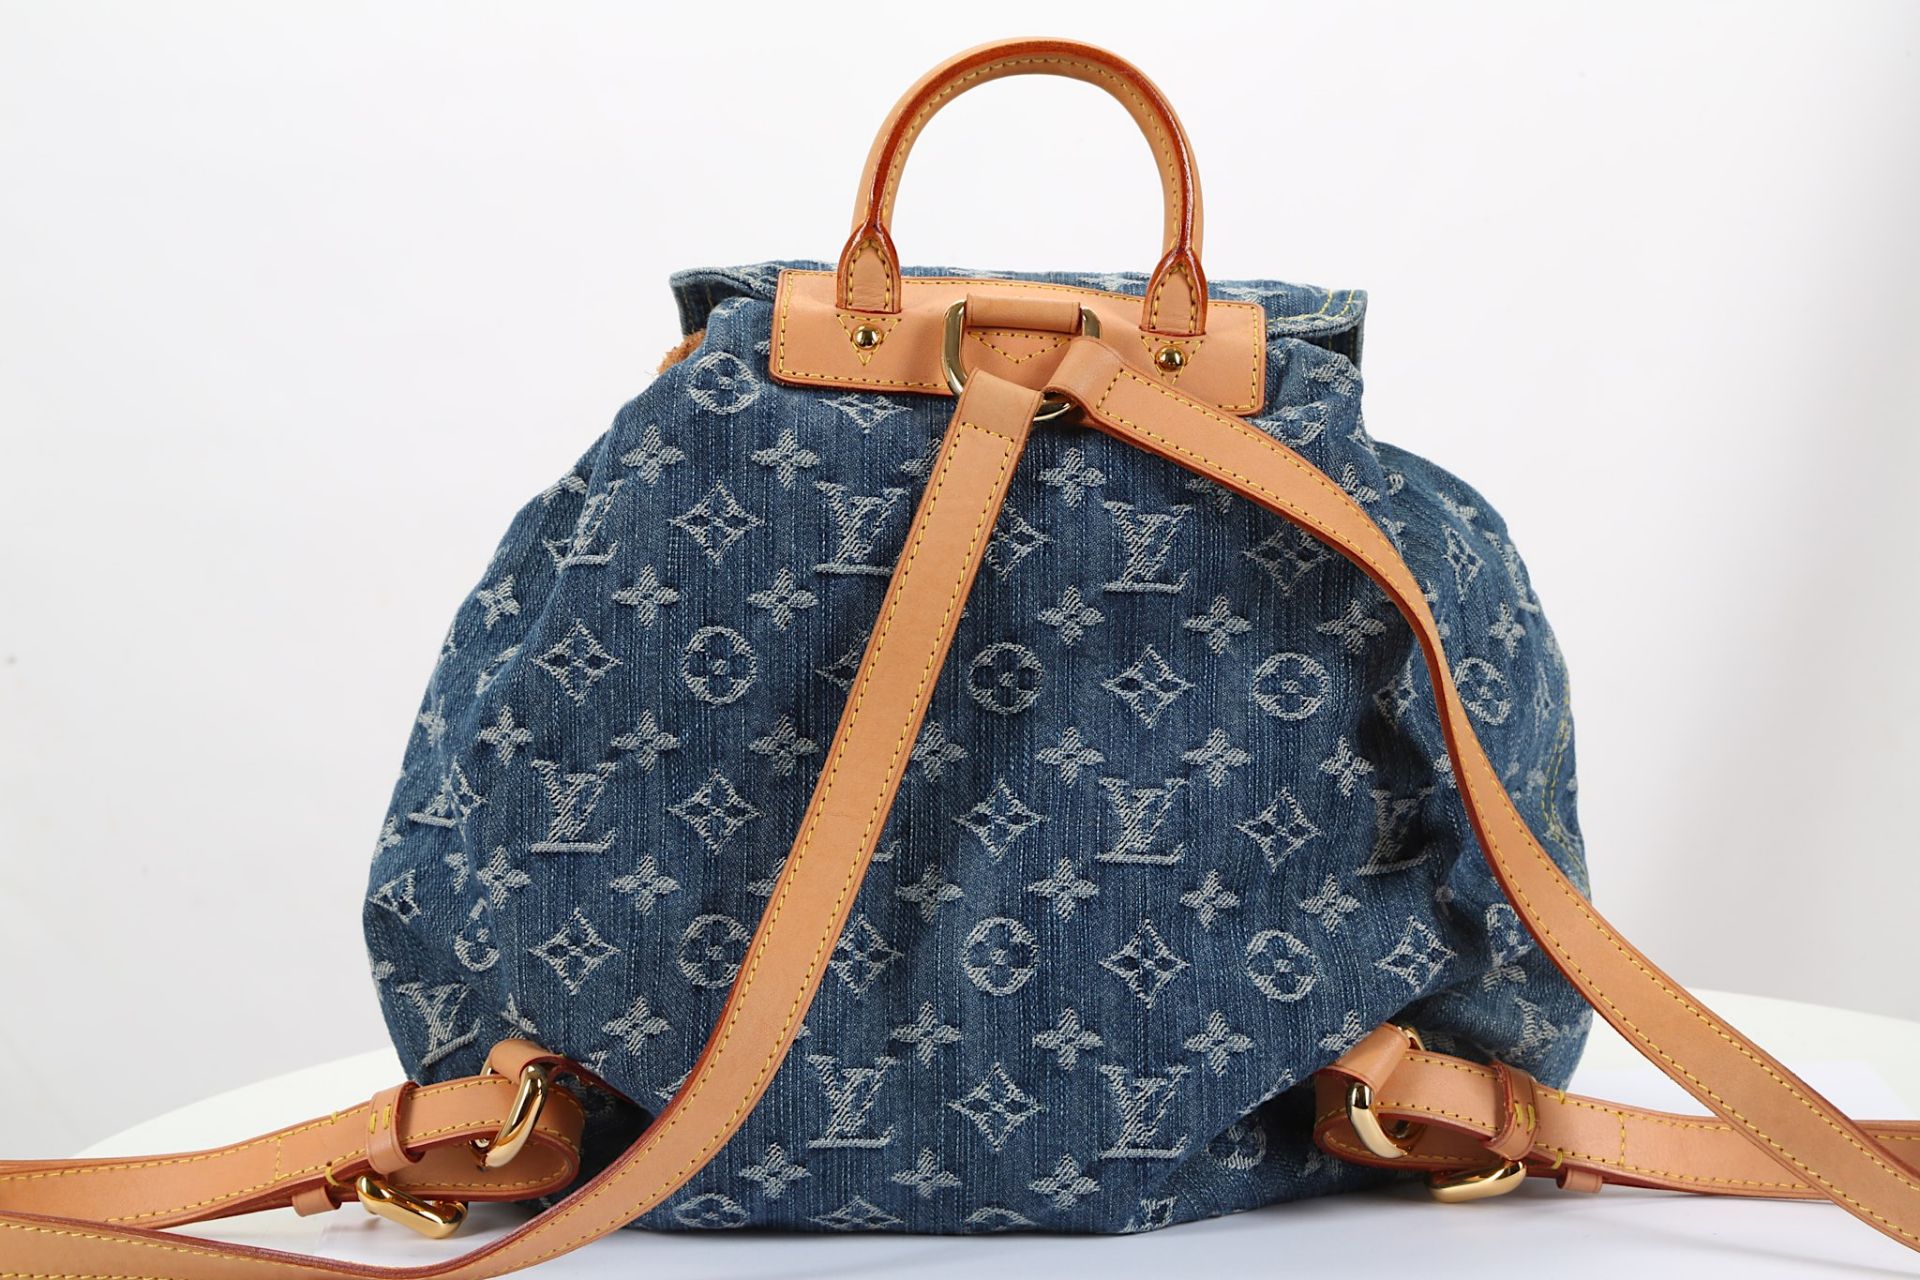 Louis Vuitton Denim Sac a Dos GM Backpack, c. 2006 - Image 4 of 6